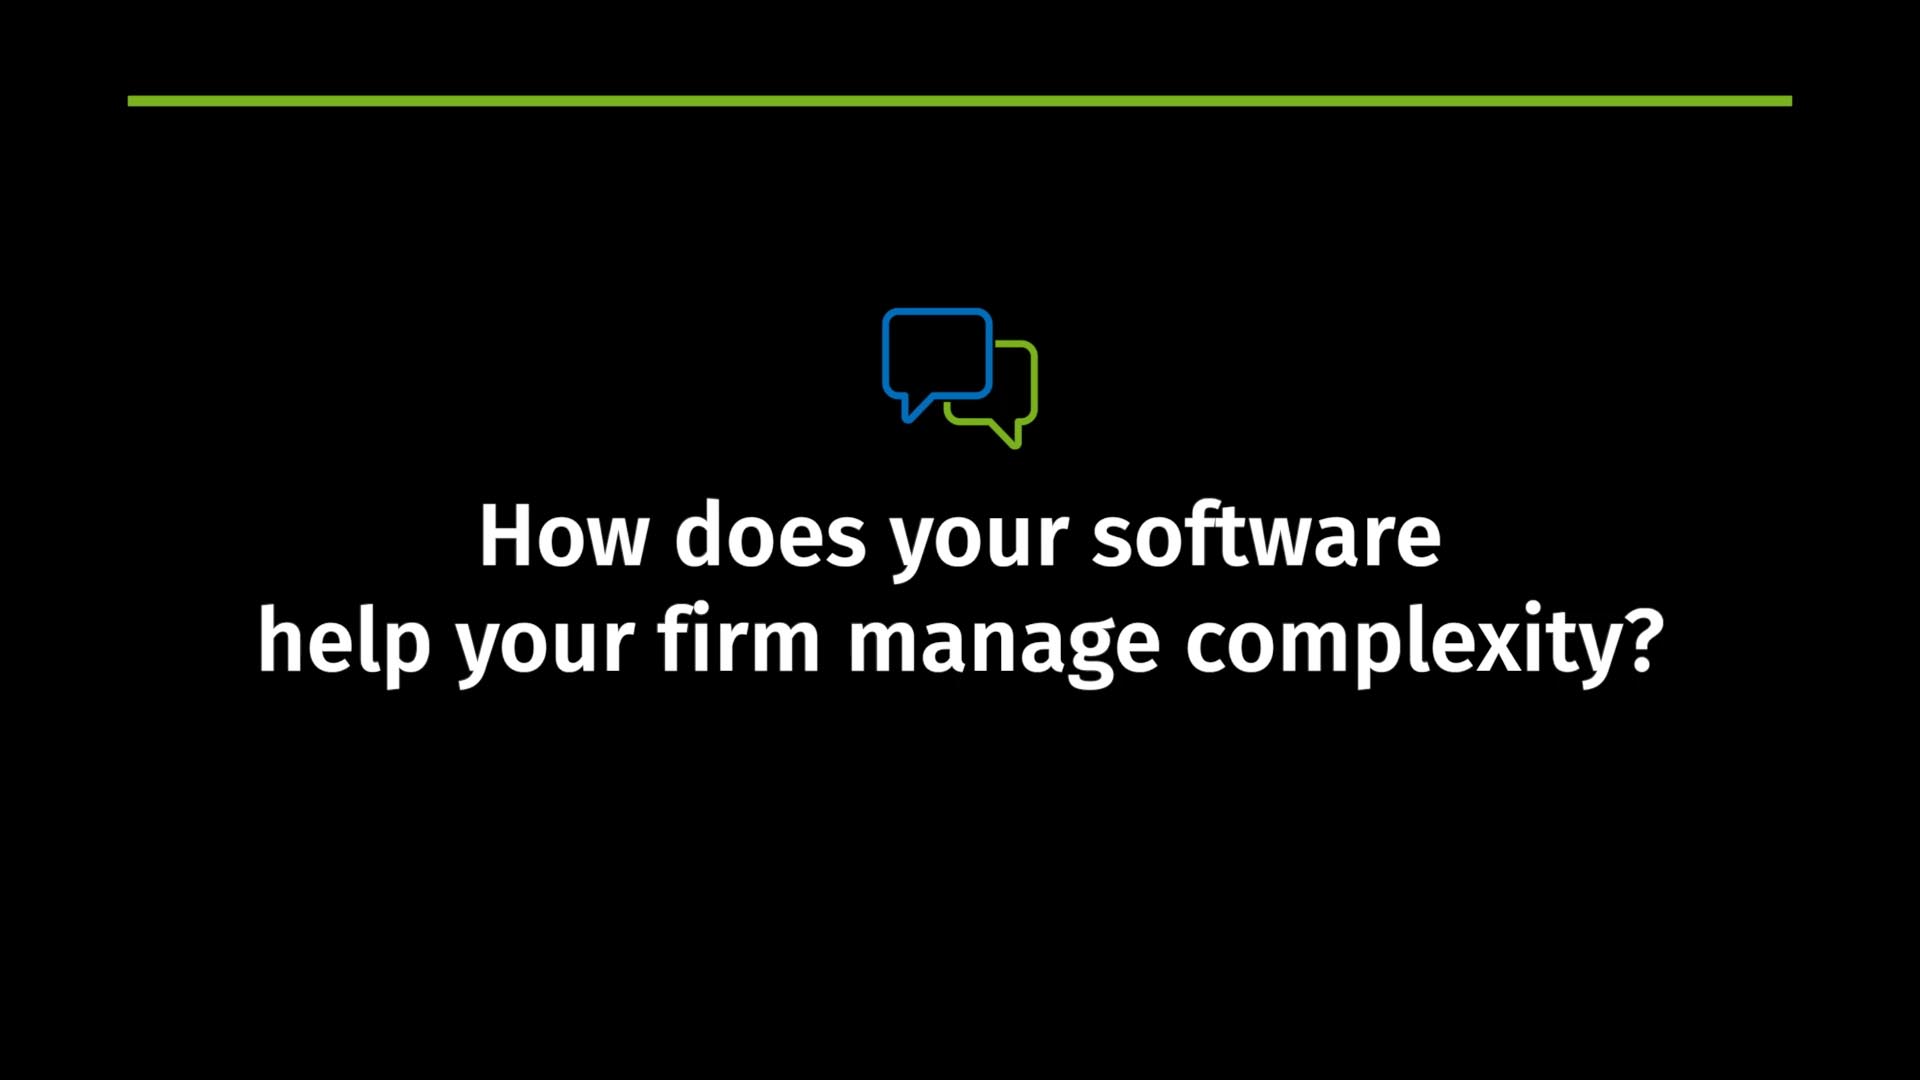 How does your software help your firm manage complexity?